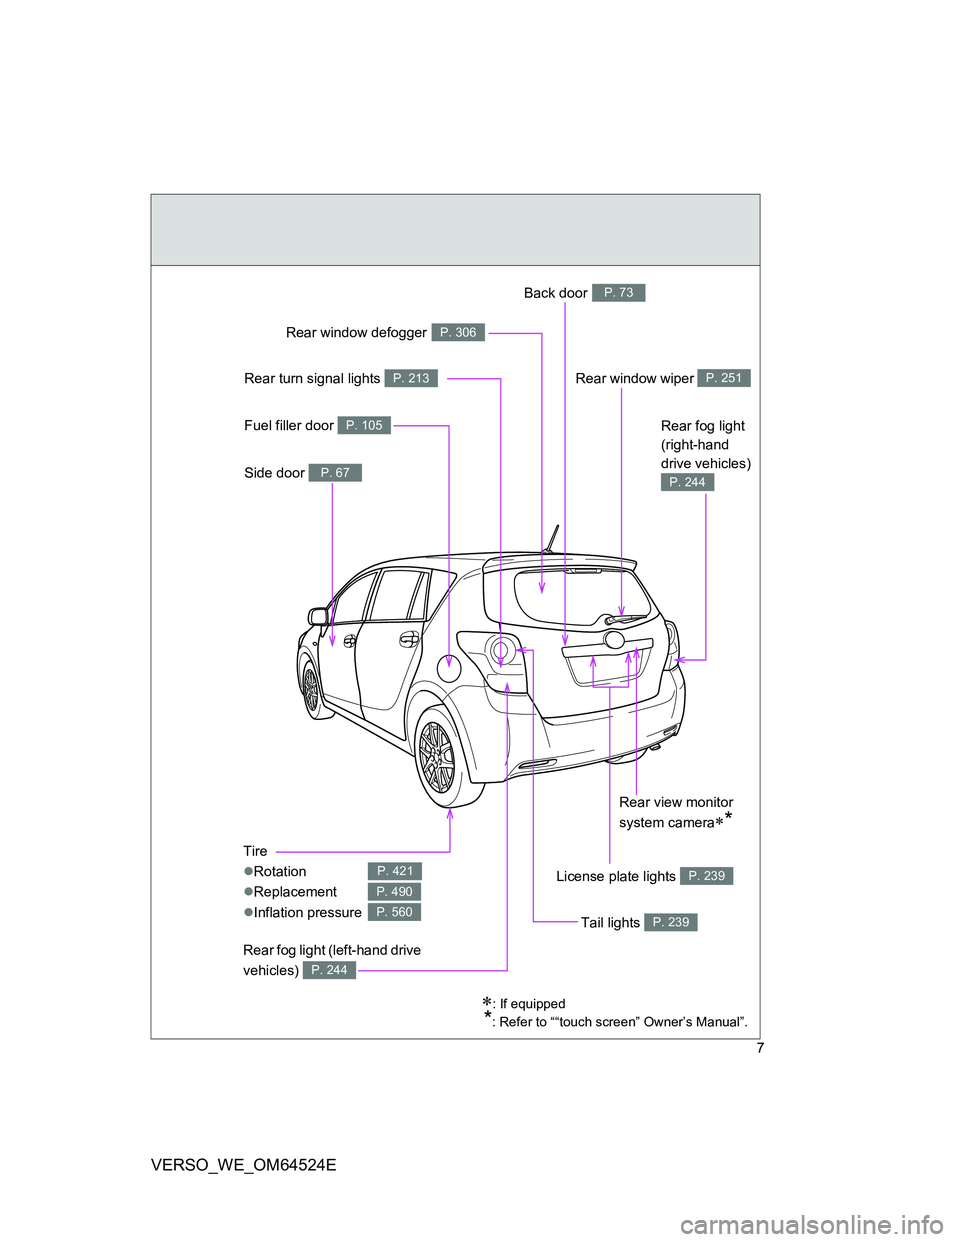 TOYOTA VERSO 2011  Owners Manual 7
VERSO_WE_OM64524E
Tire
Rotation
Replacement
Inflation pressure
P. 421
P. 490
P. 560
Rear window wiper P. 251
Side door P. 67
Fuel filler door P. 105
Rear fog light (left-hand drive 
vehicle